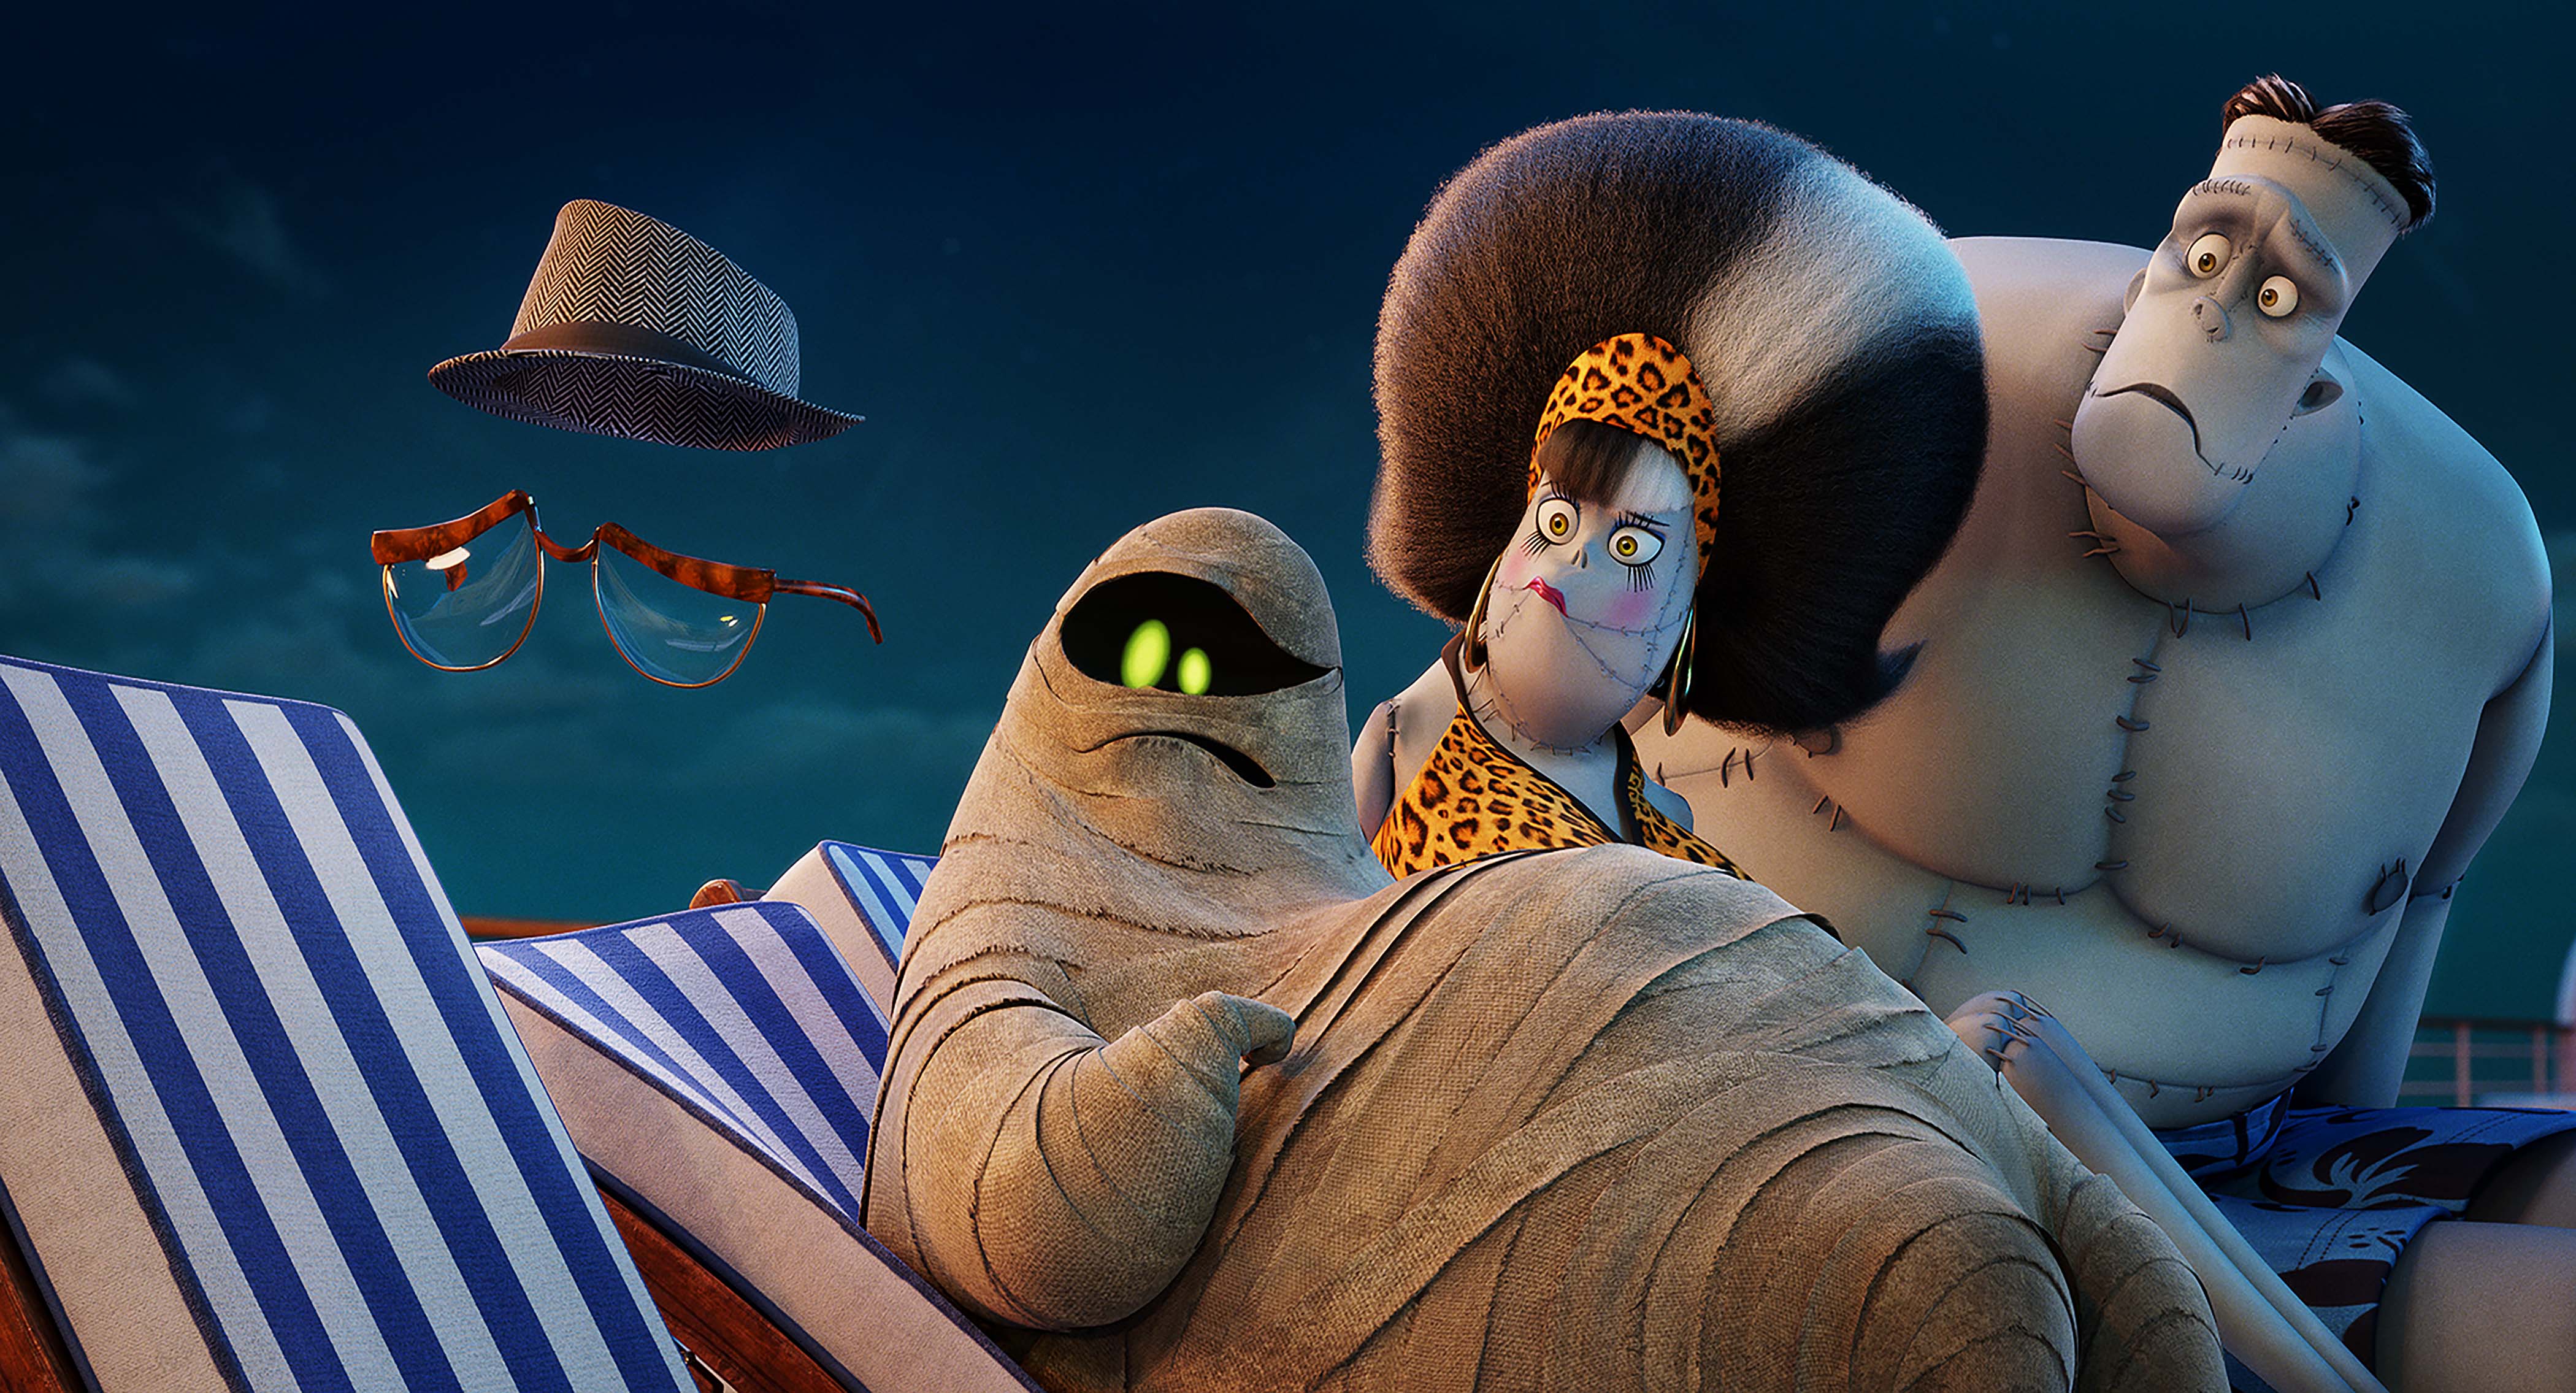 Hotel Transylvania 3 Scares Up A Win At The Box Office The Nerdy